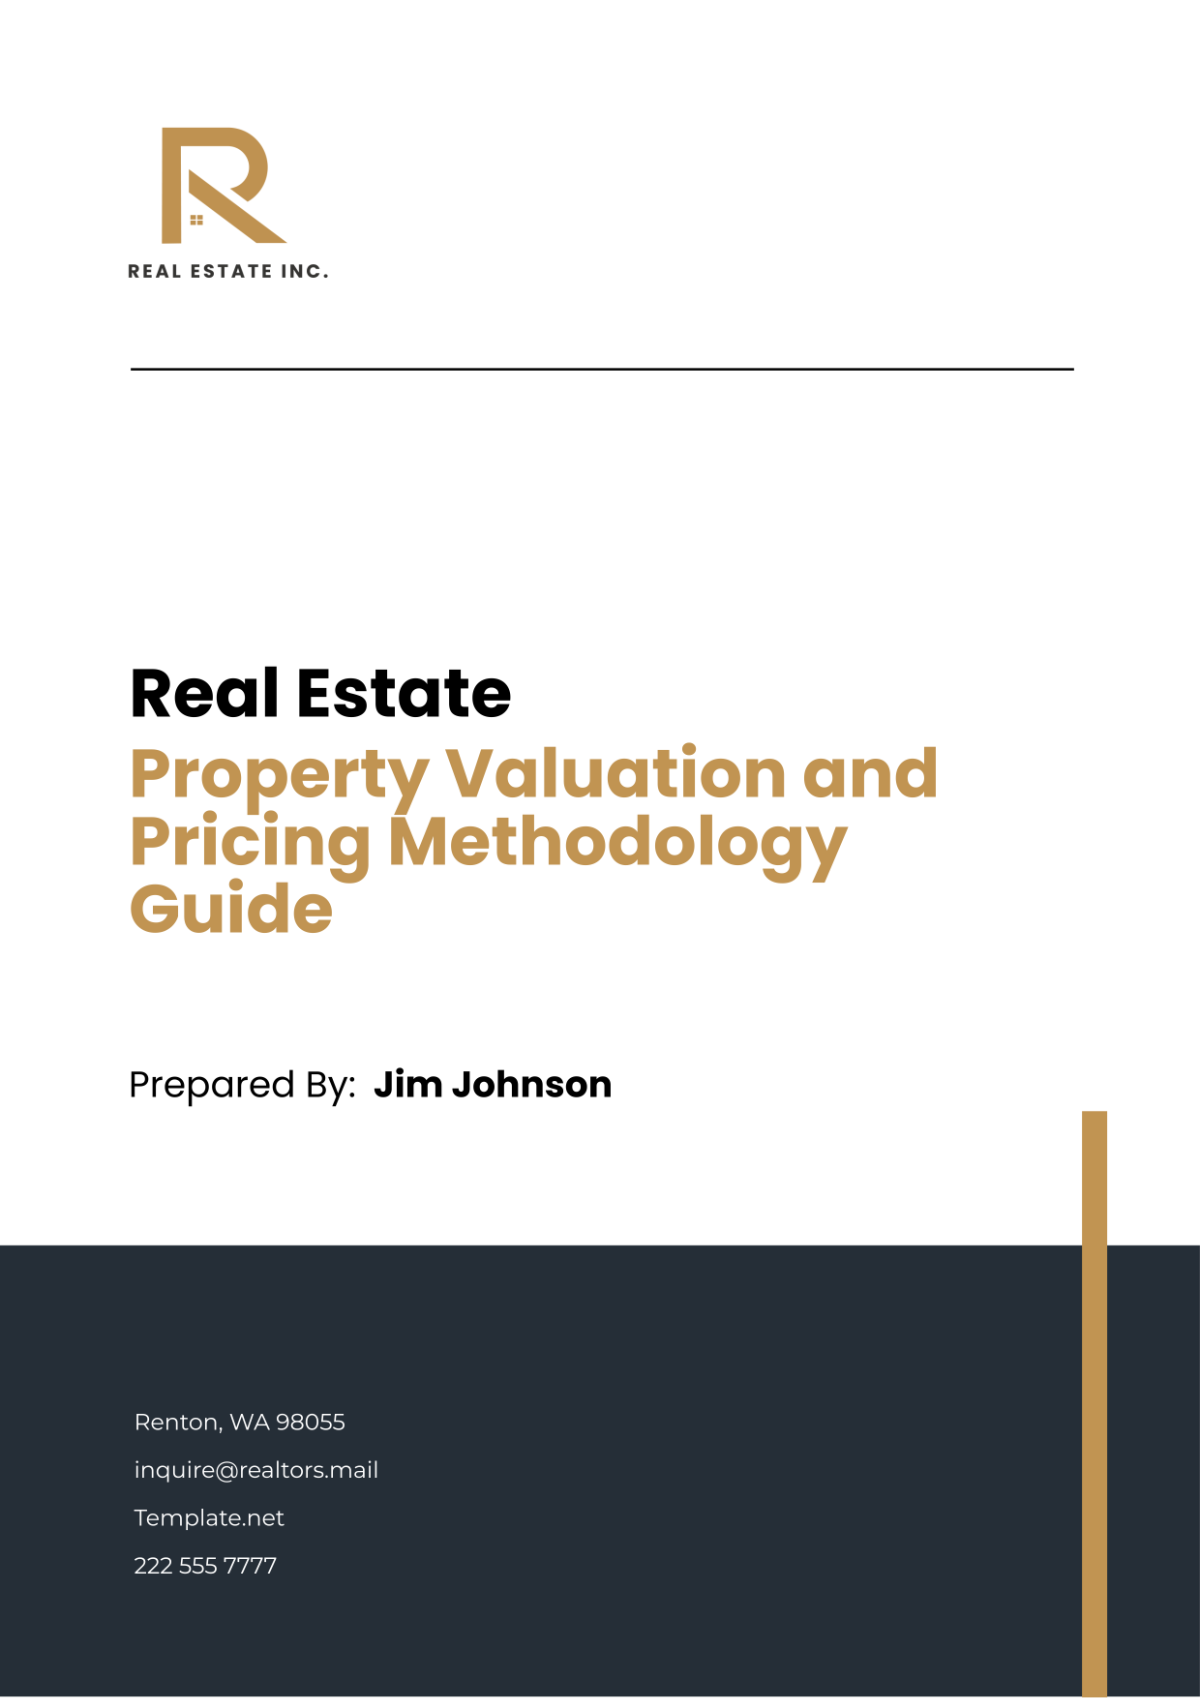 Real Estate Property Valuation and Pricing Methodology Guide Template